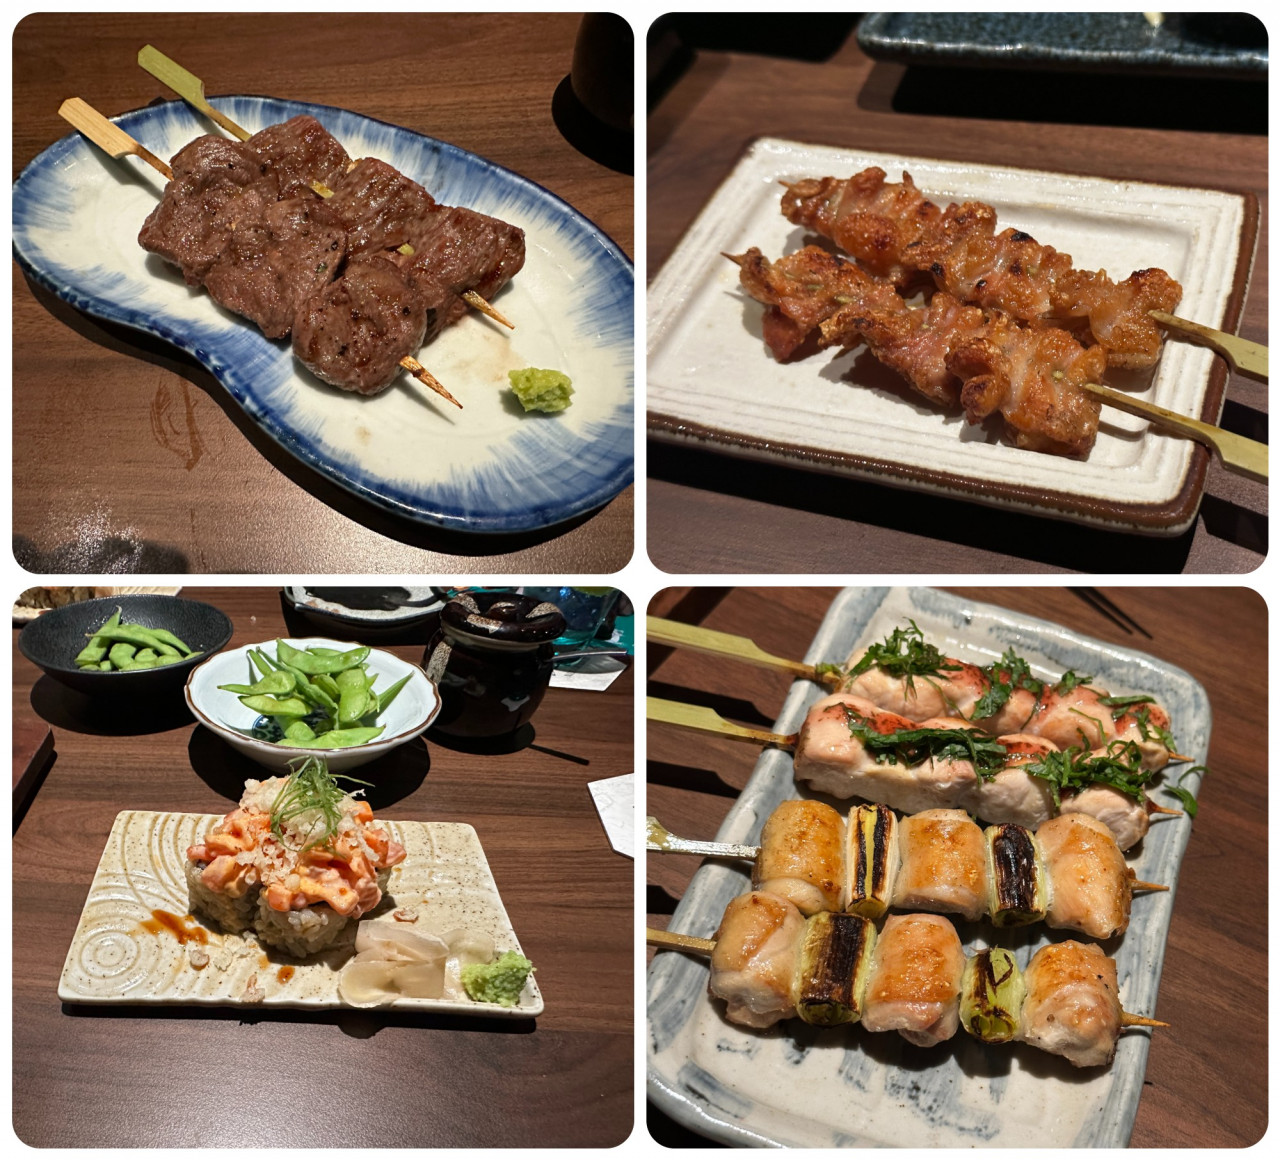 There’s nothing more elemental in terms of cuisine than meat on a stick. A variety of proteins prepared in the traditional Japanese way… oh and some sushi. – Haikal Fernandez pic